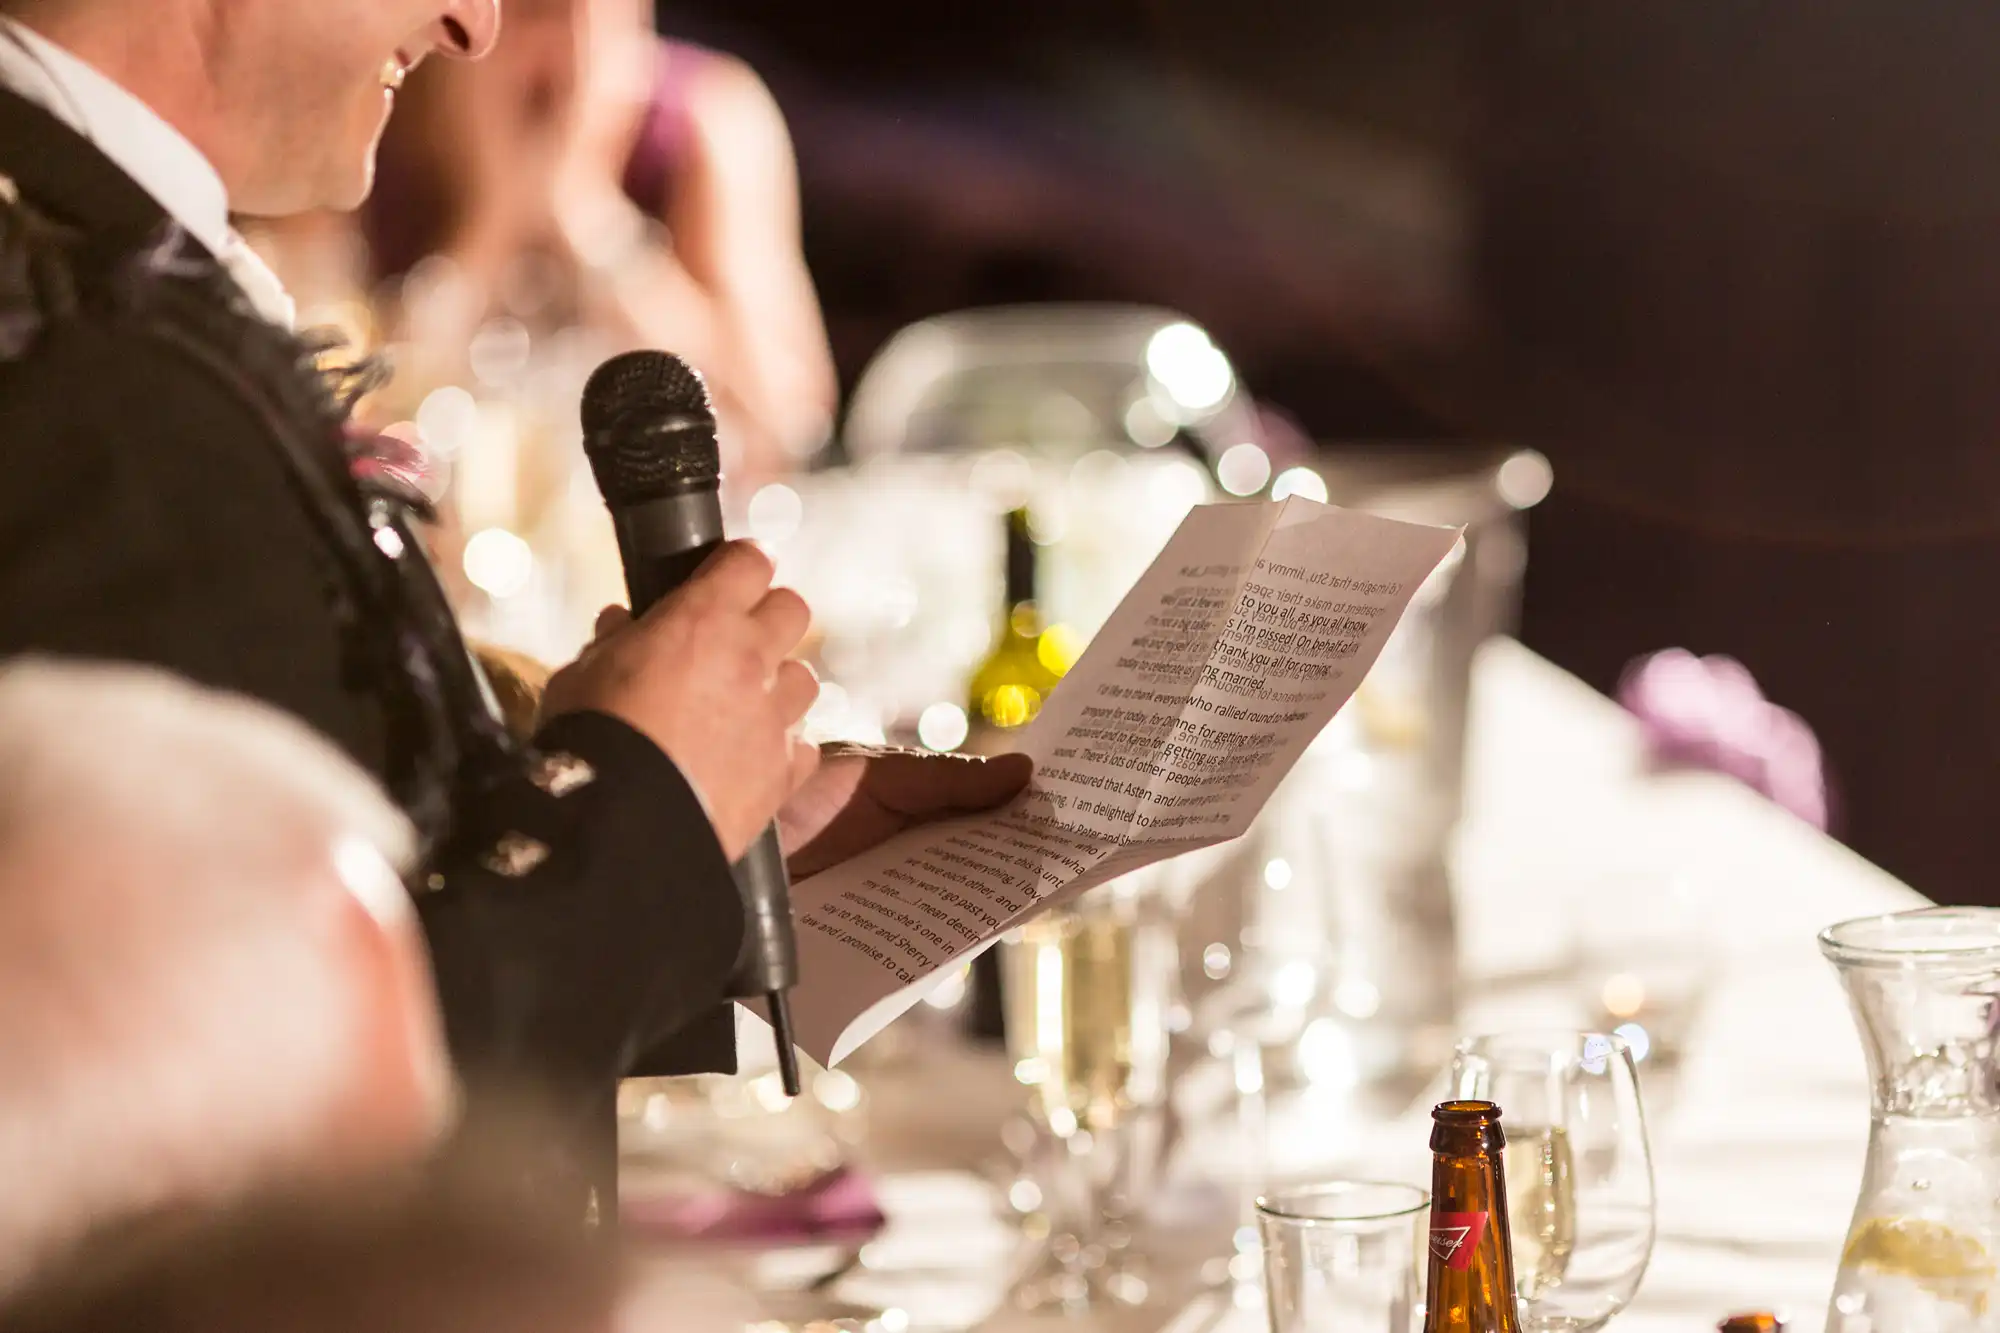 A man in a suit giving a speech at a wedding reception, holding a microphone and a sheet of paper, with blurred guests in the background.